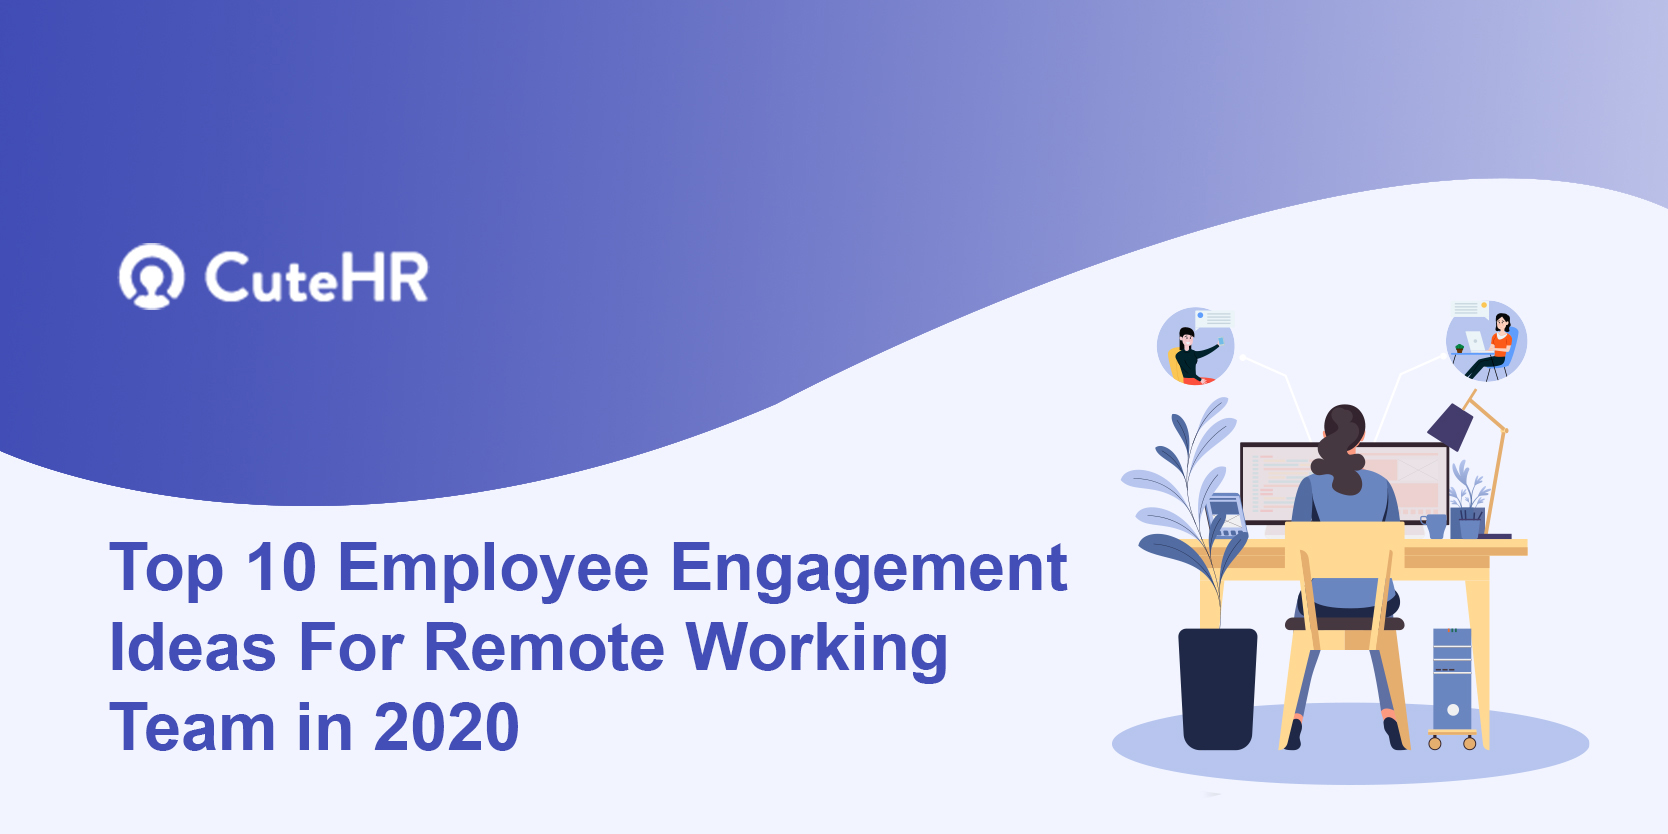 Top 10 Employee Engagement Ideas for Remote Working Team